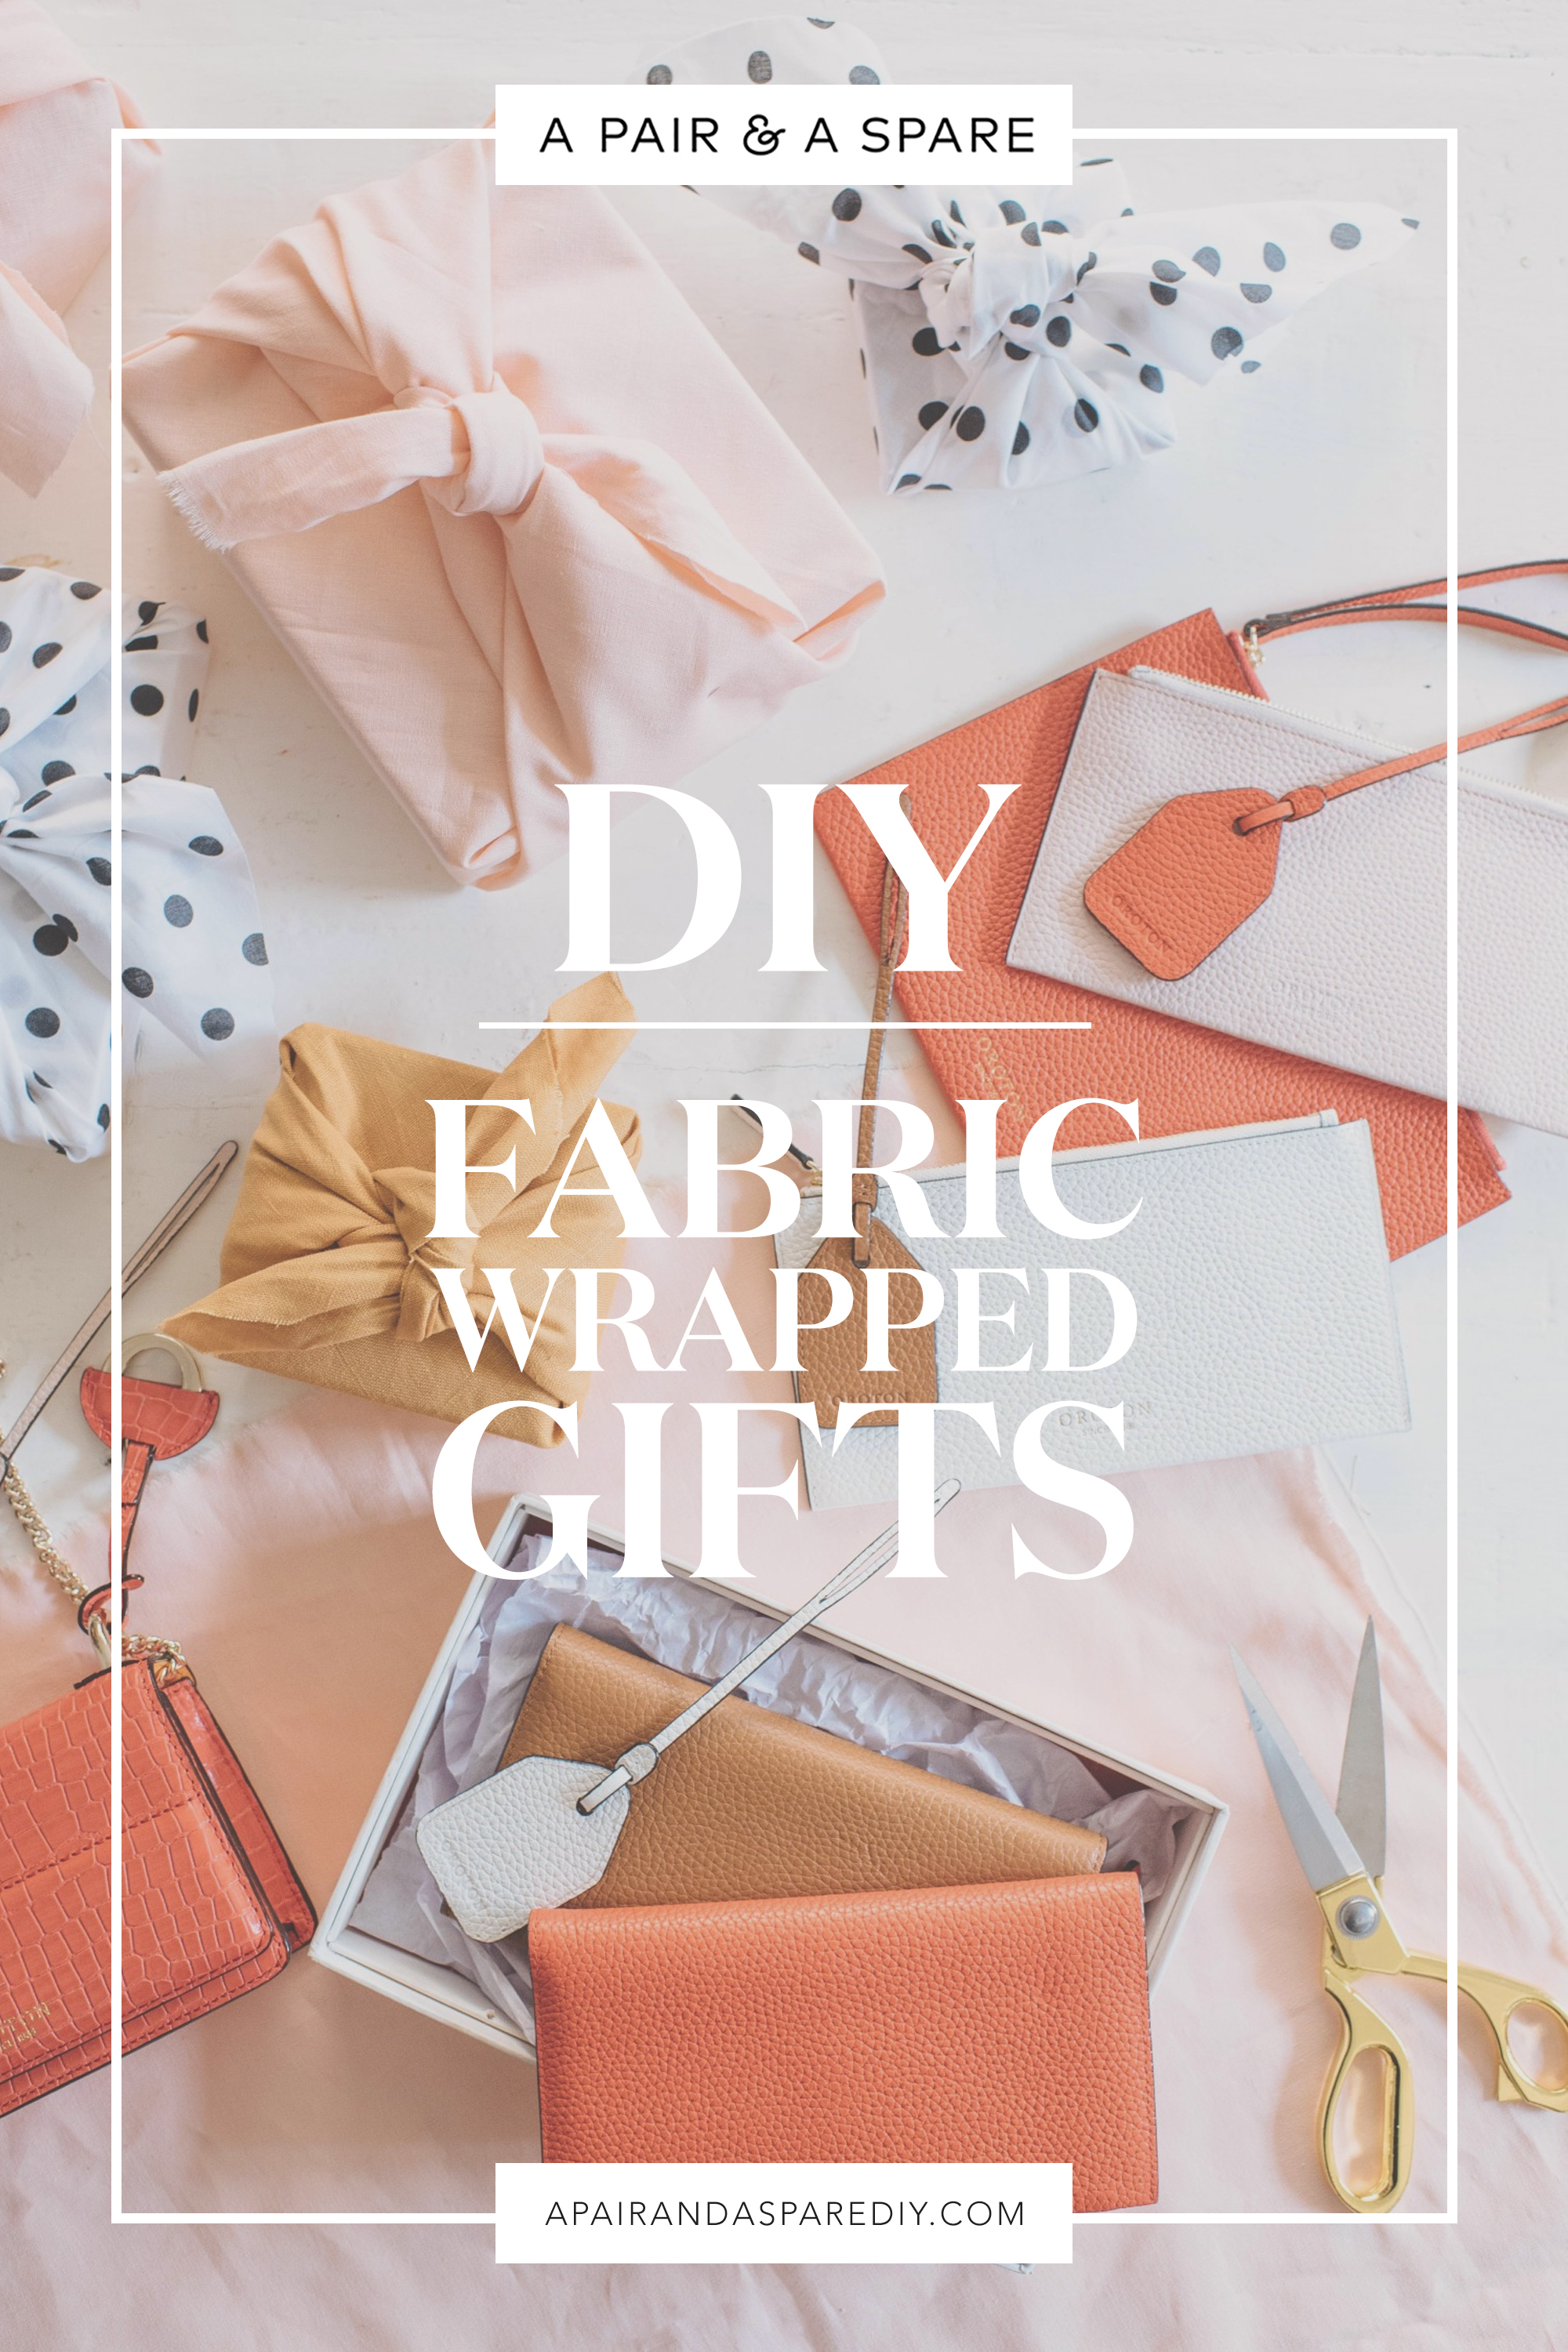 DIY Fabric Wrapped Gifts